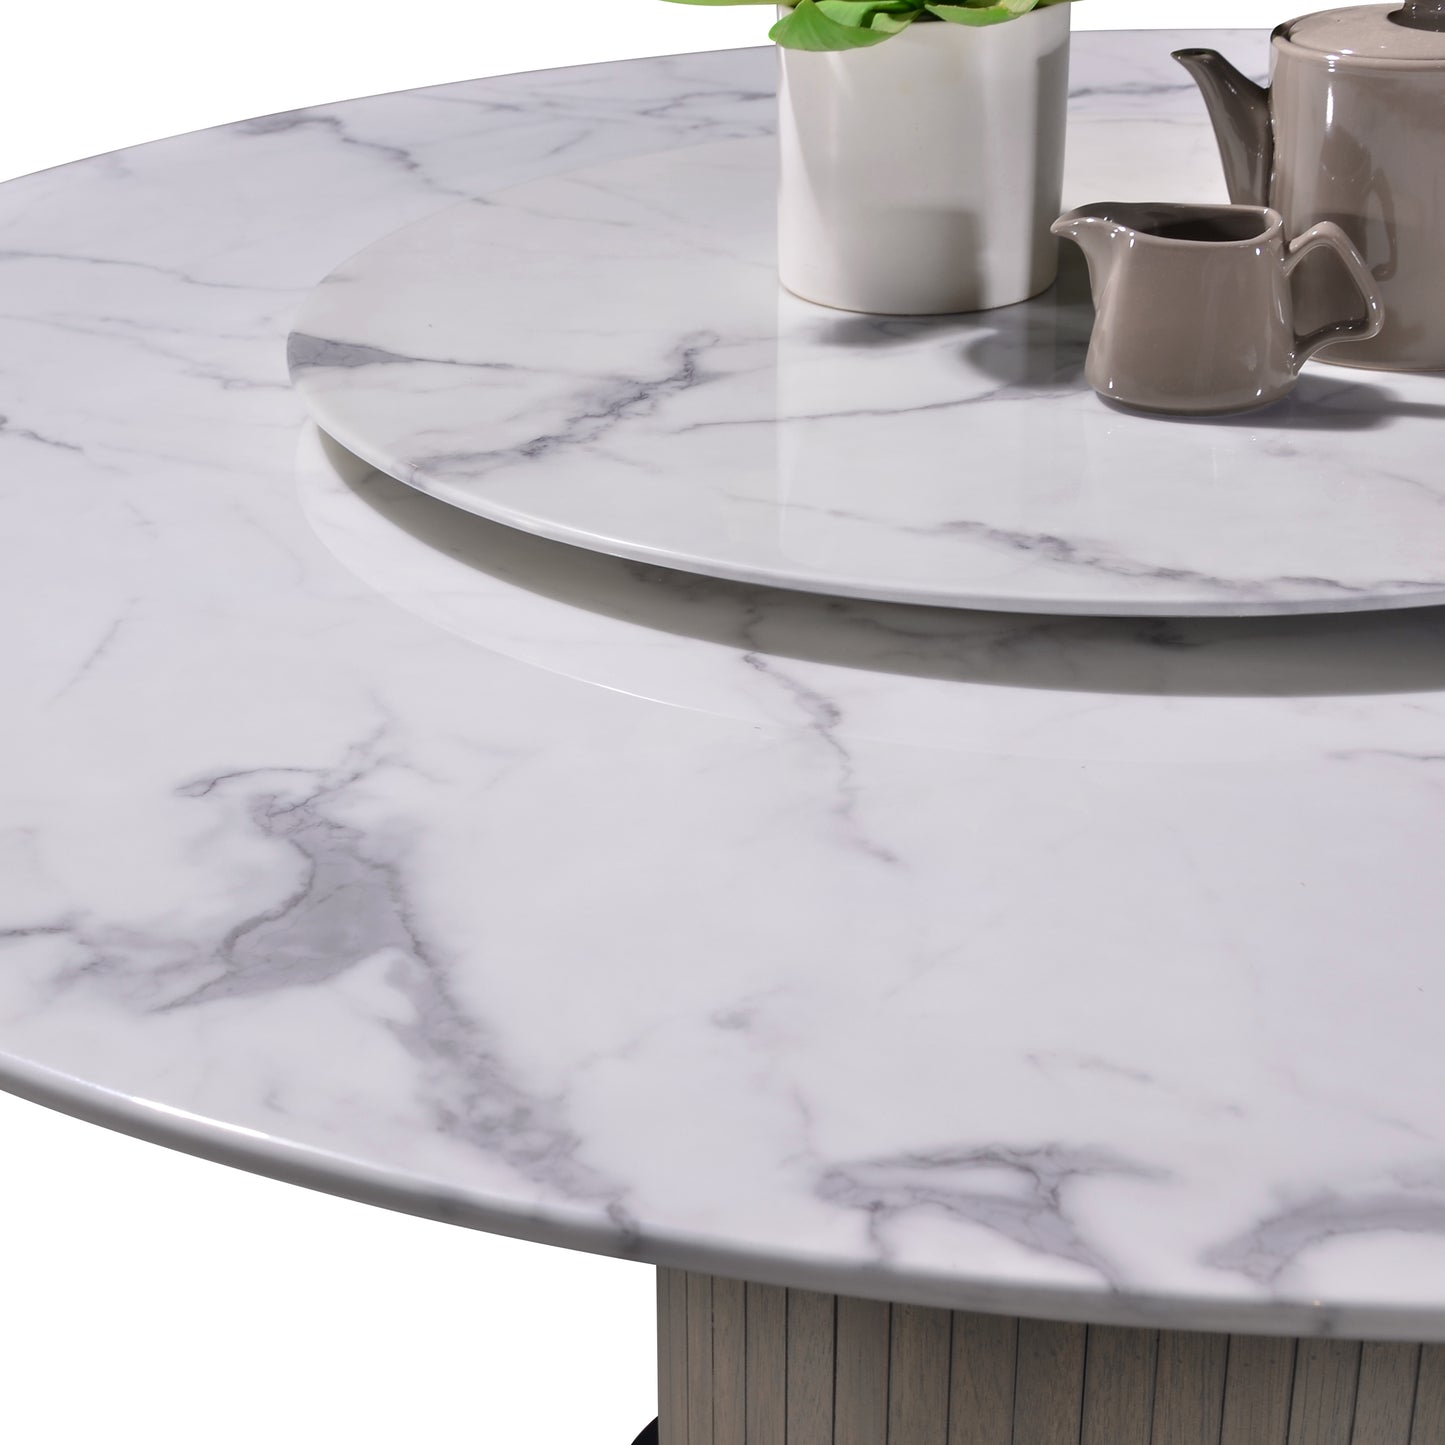 Criterion Eucla Dining Table 1500mm Round 20mm Laminated Marble Top with Lazy Susan KSK Slate Wood Veneer